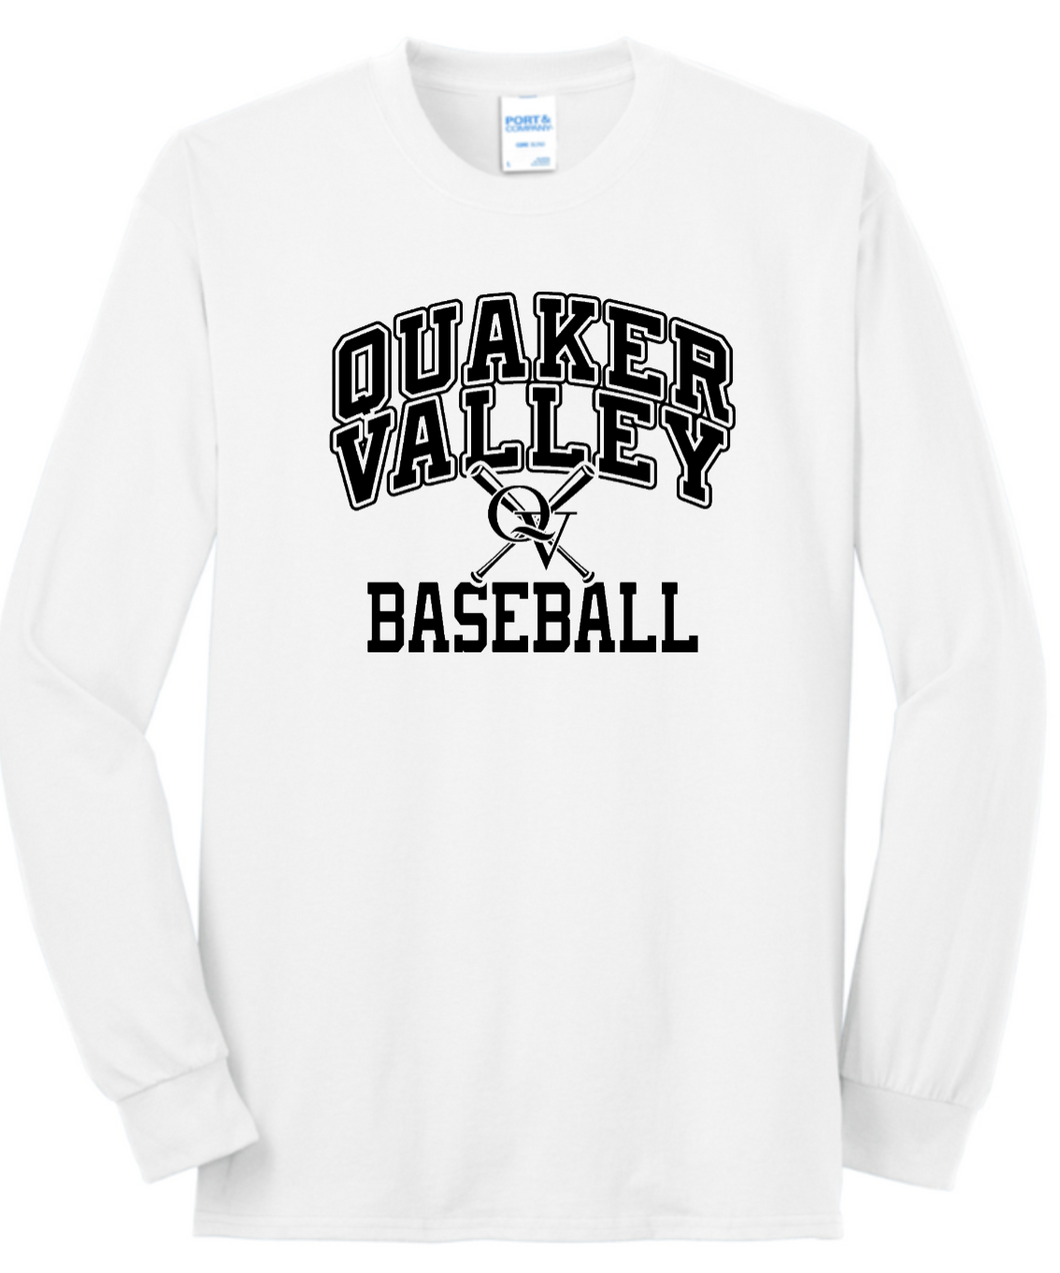 QUAKER VALLEY BASEBALL CORE COTTON JERSEY YOUTH & ADULT LONG SLEEVE TEE